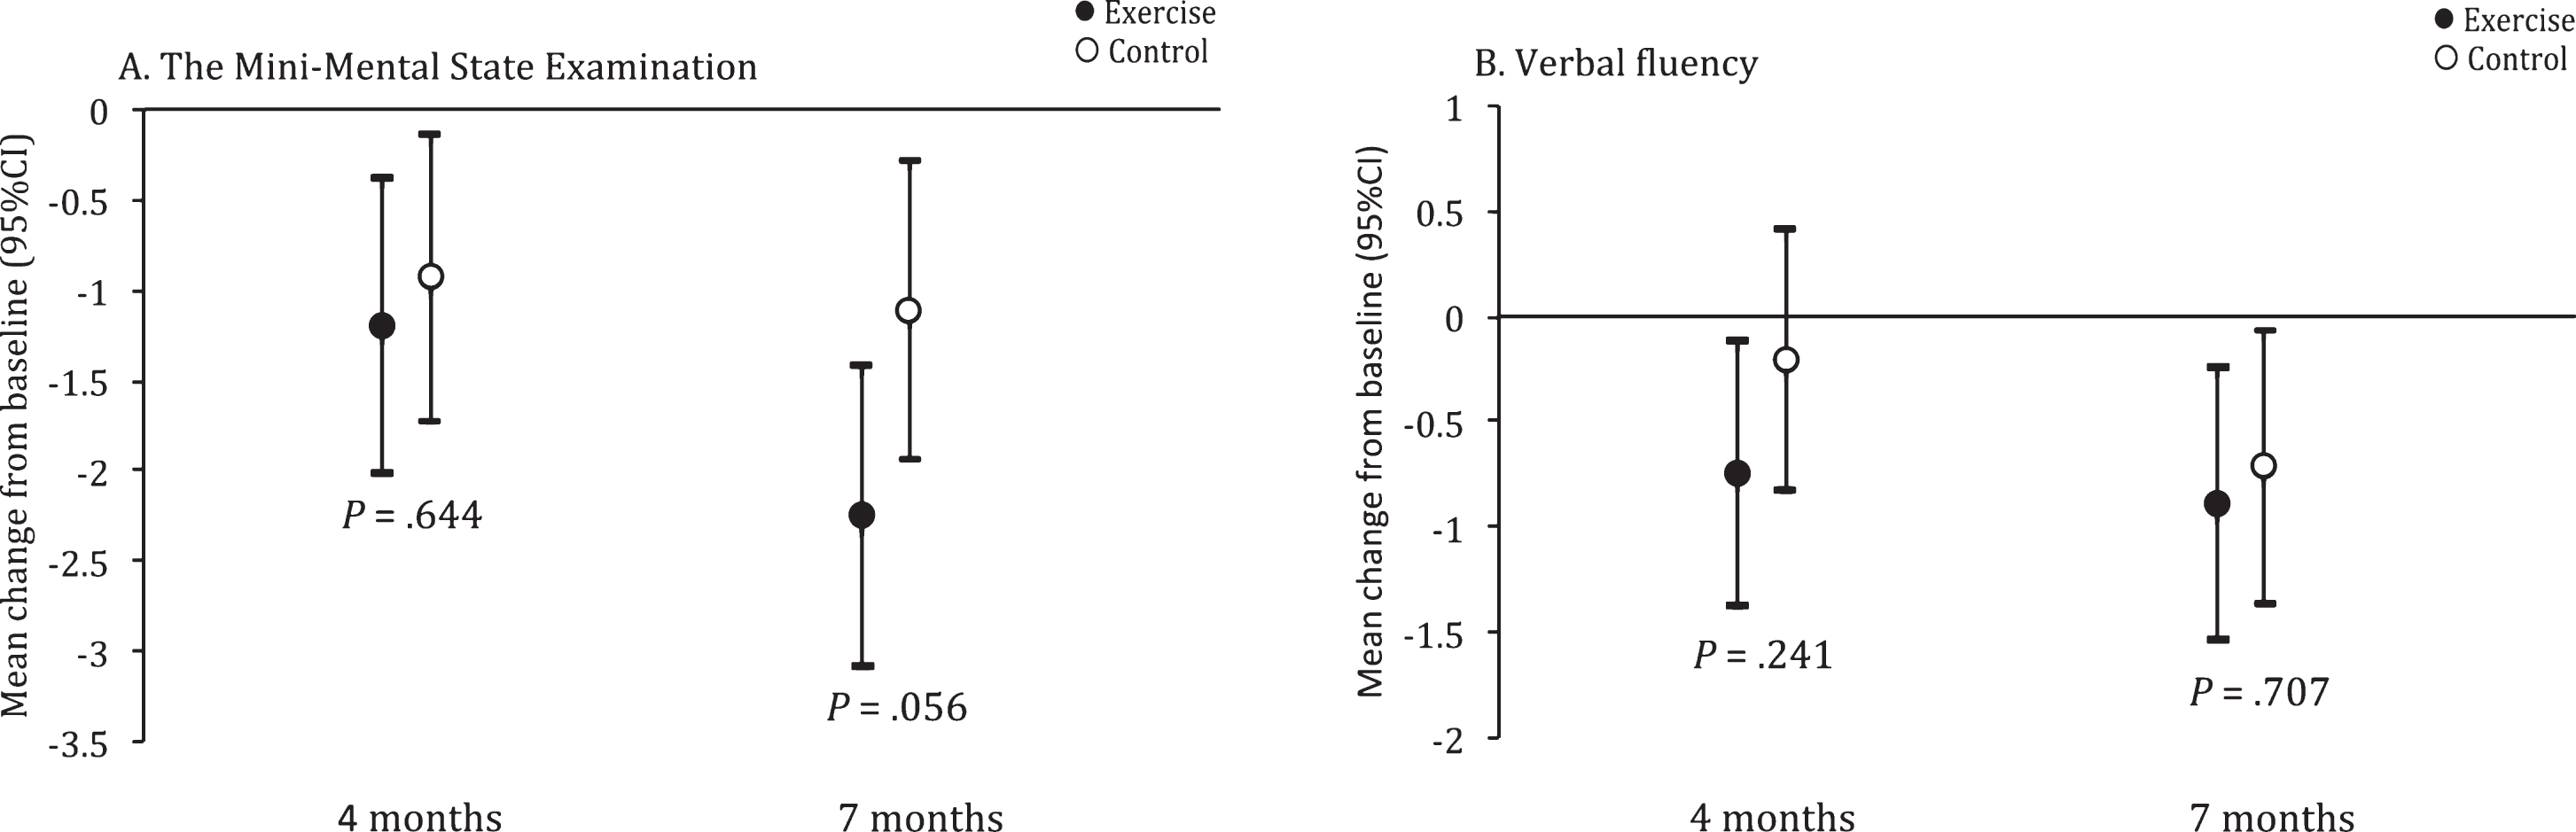 Between-group differences from baseline in Mini-Mental State Examination (MMSE) and Verbal fluency (VF). Values are least square mean change from baseline, with 95% confidence intervals, from linear mixed-effects models adjusted for age, sex, and antidepressant use.